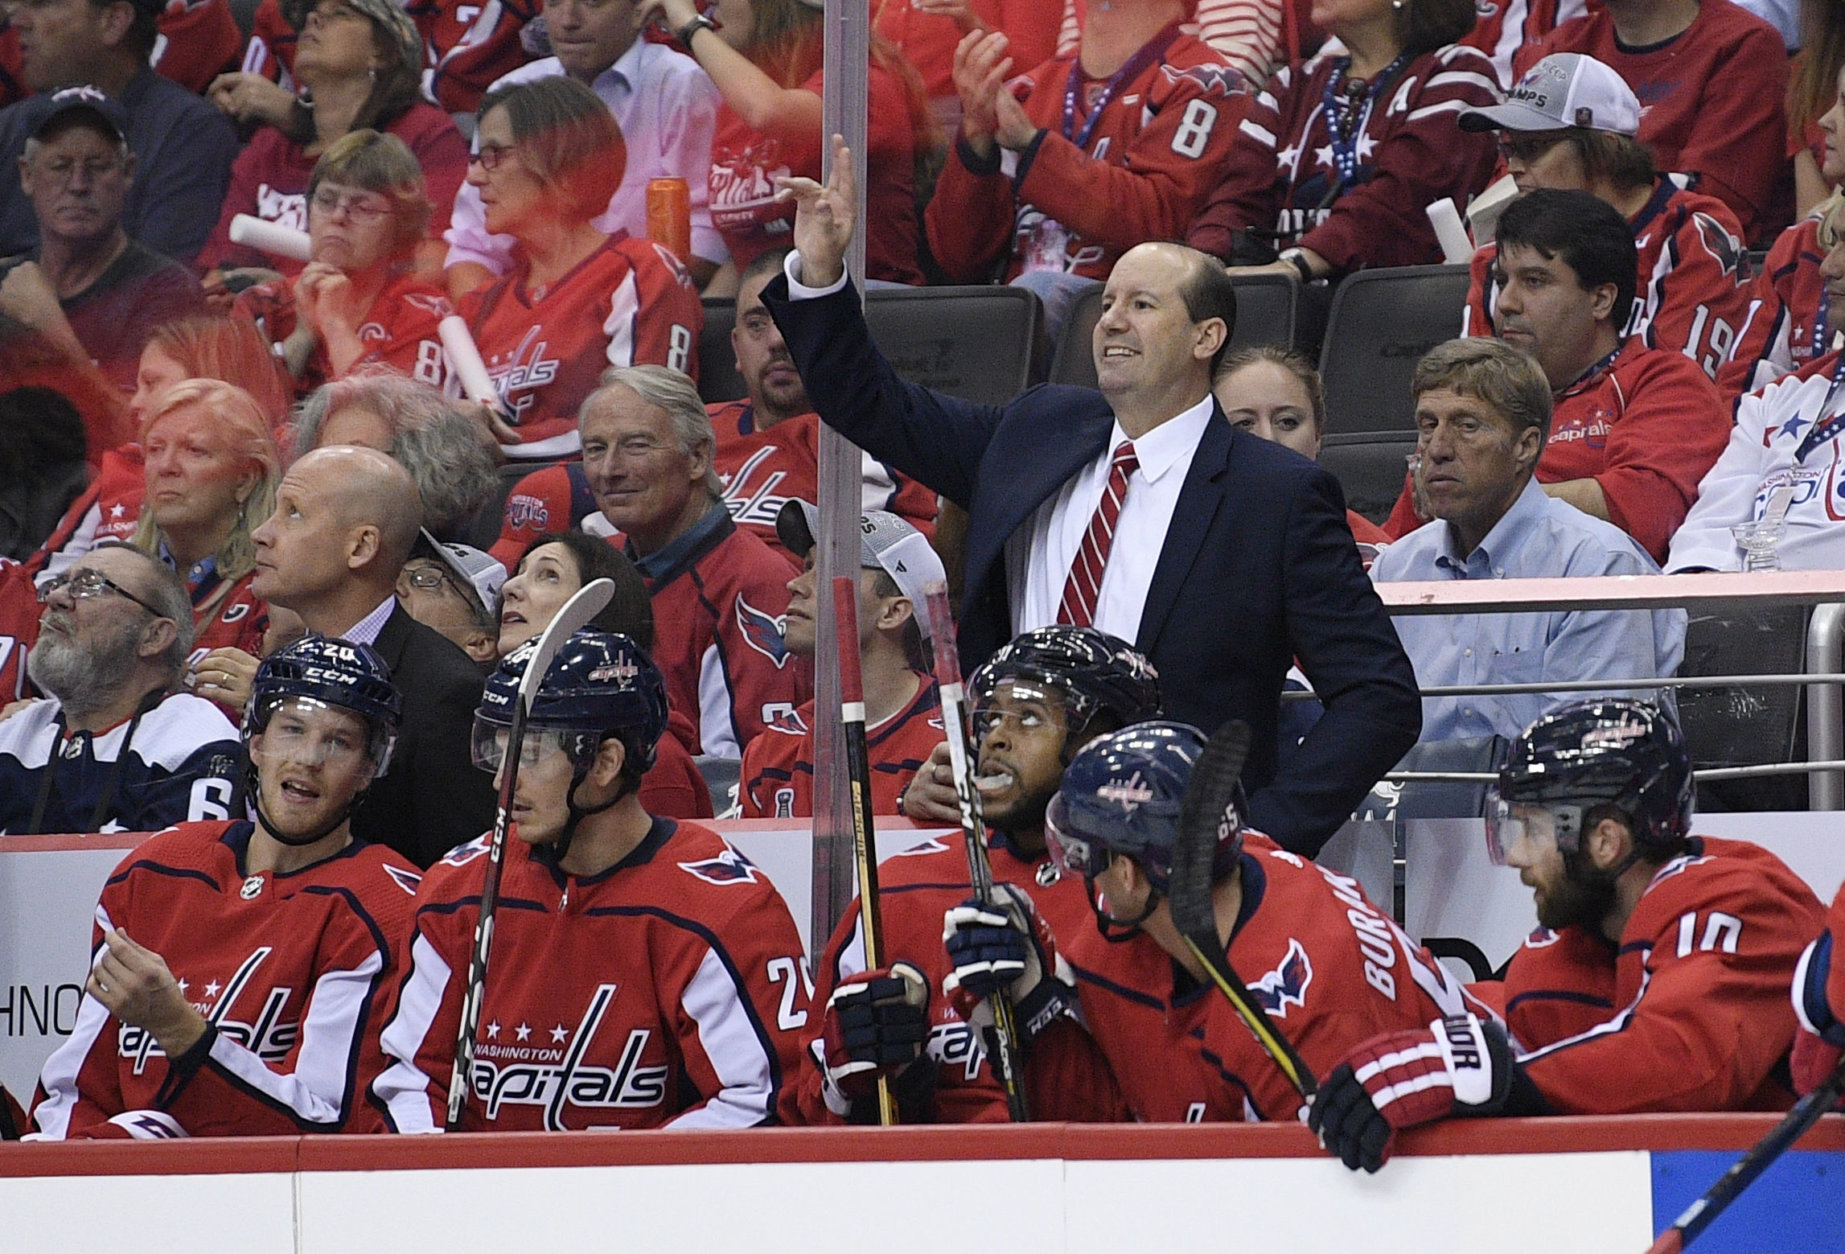 Washington Capitals head coach Todd Reirden gestures from the bench during the first period of an NHL hockey game against the Boston Bruins, Wednesday, Oct. 3, 2018, in Washington. (AP Photo/Nick Wass)